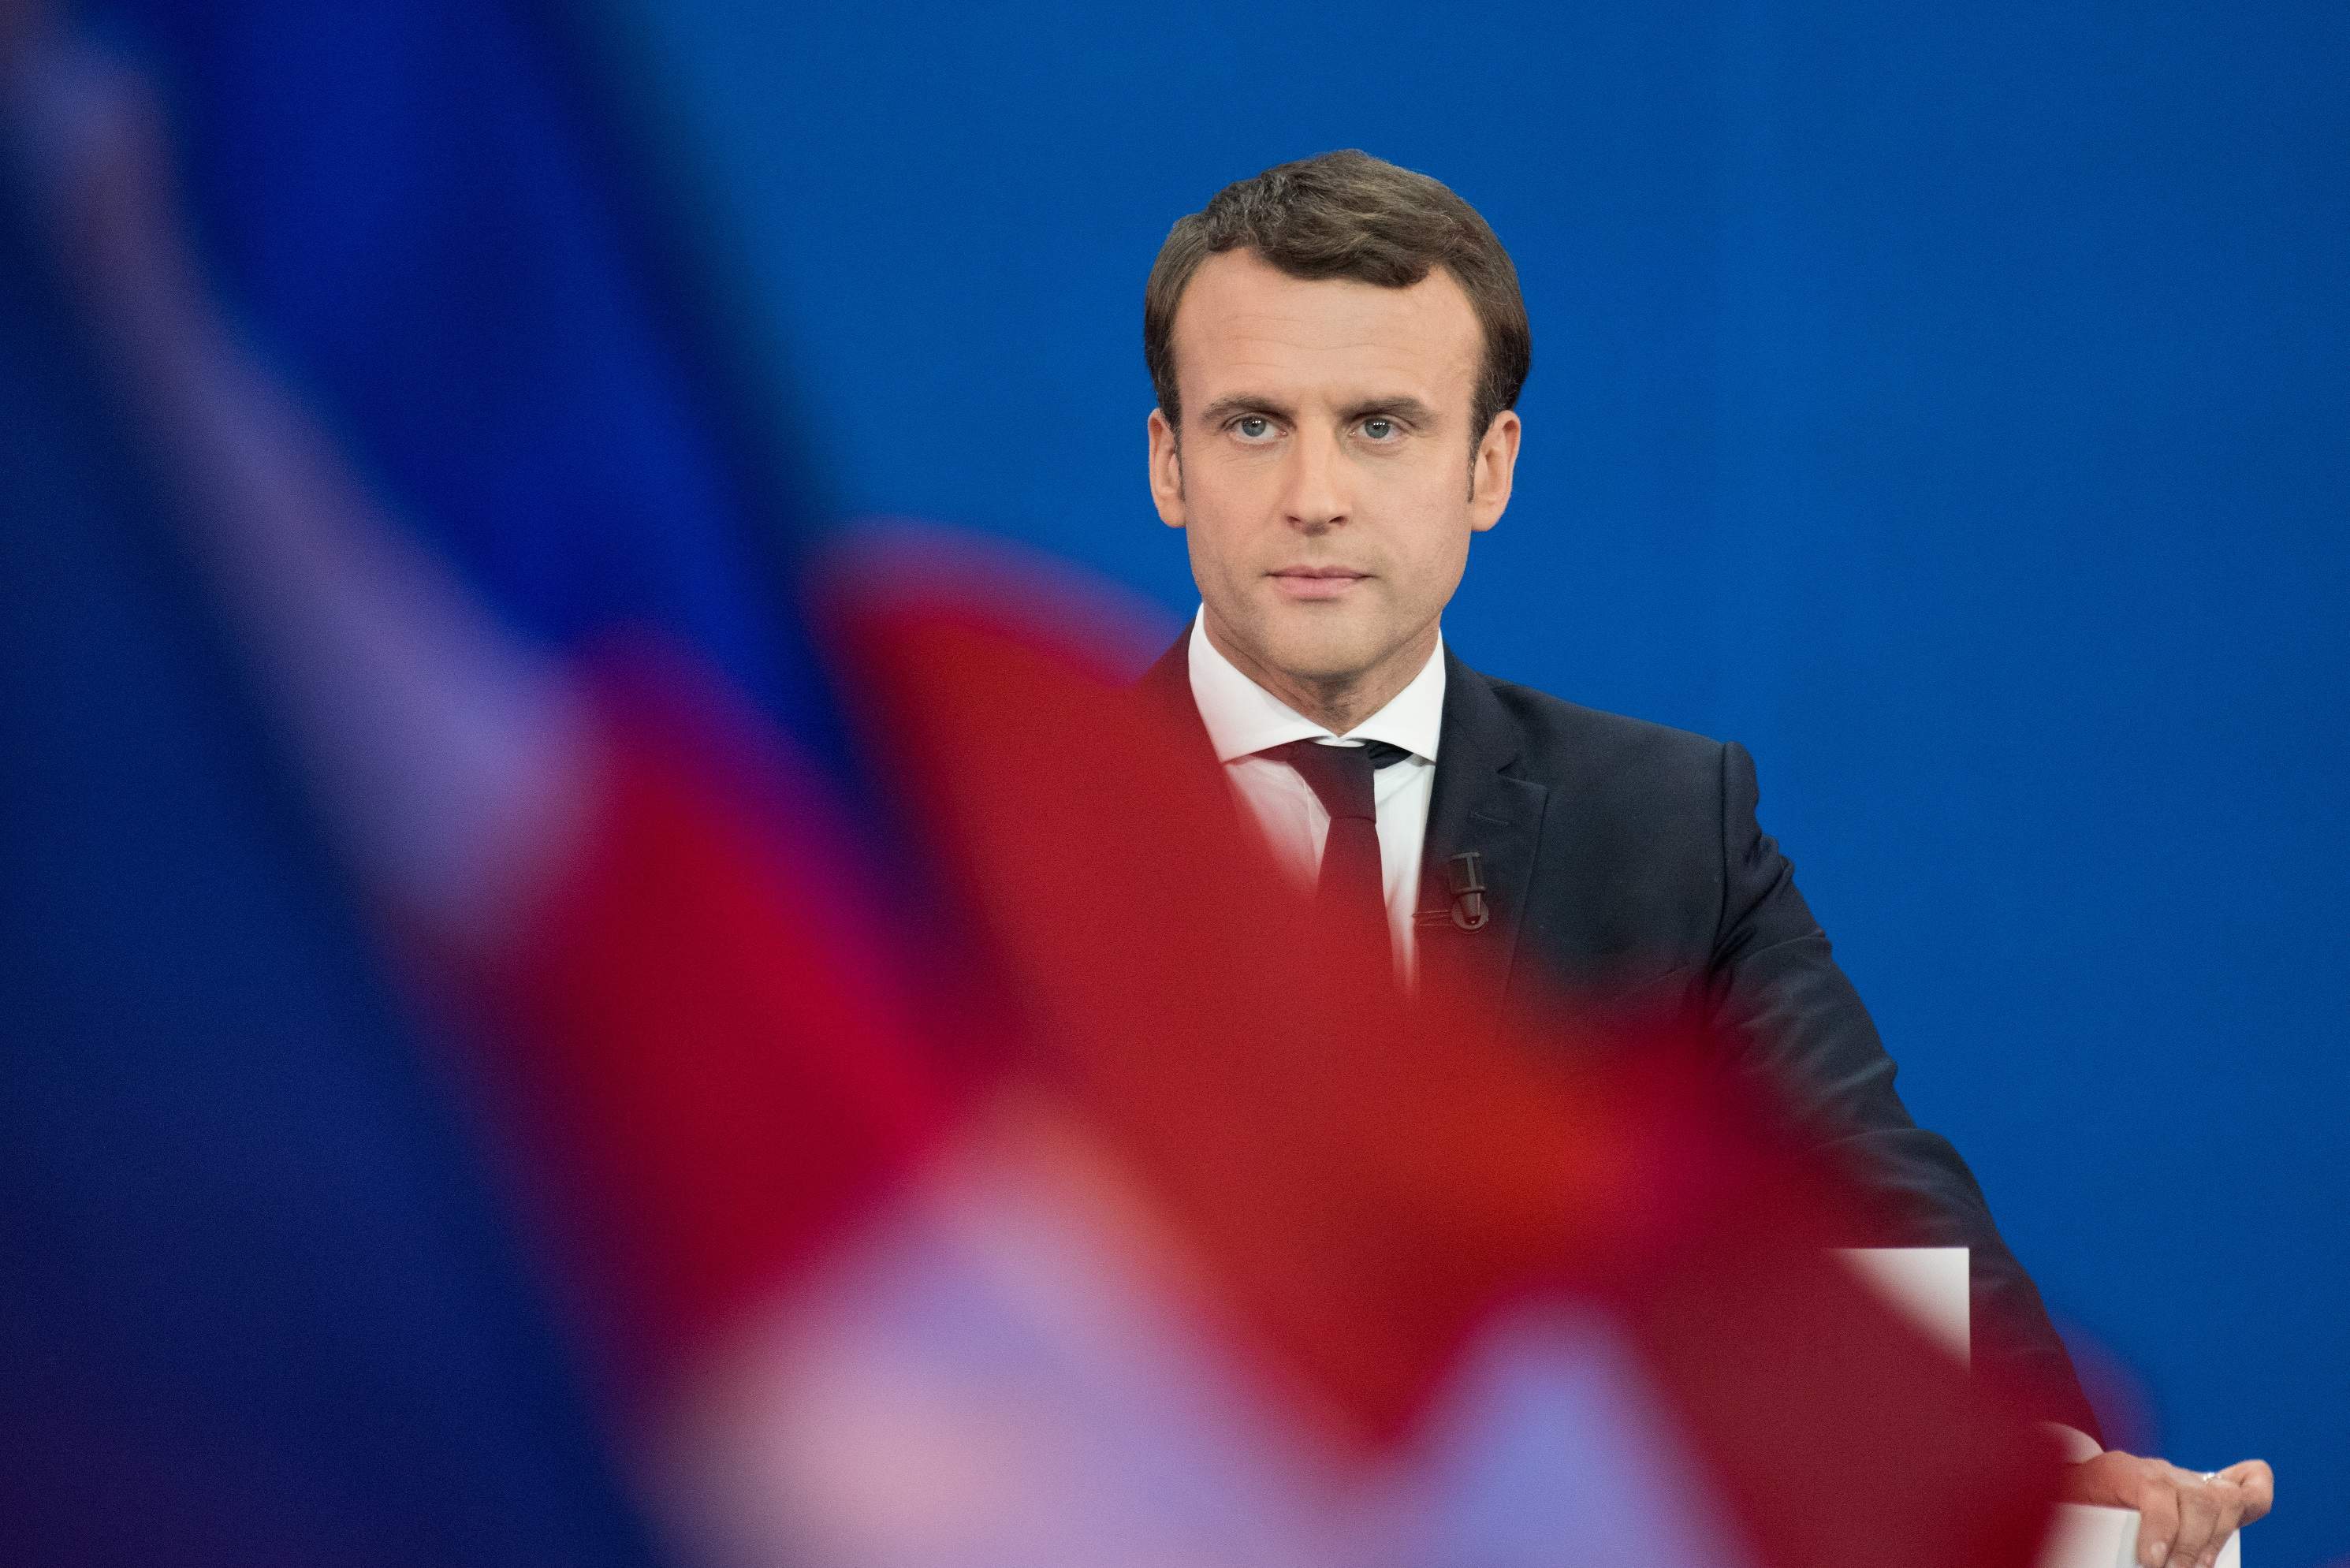 Russian hackers strike again – this time in the French presidential election